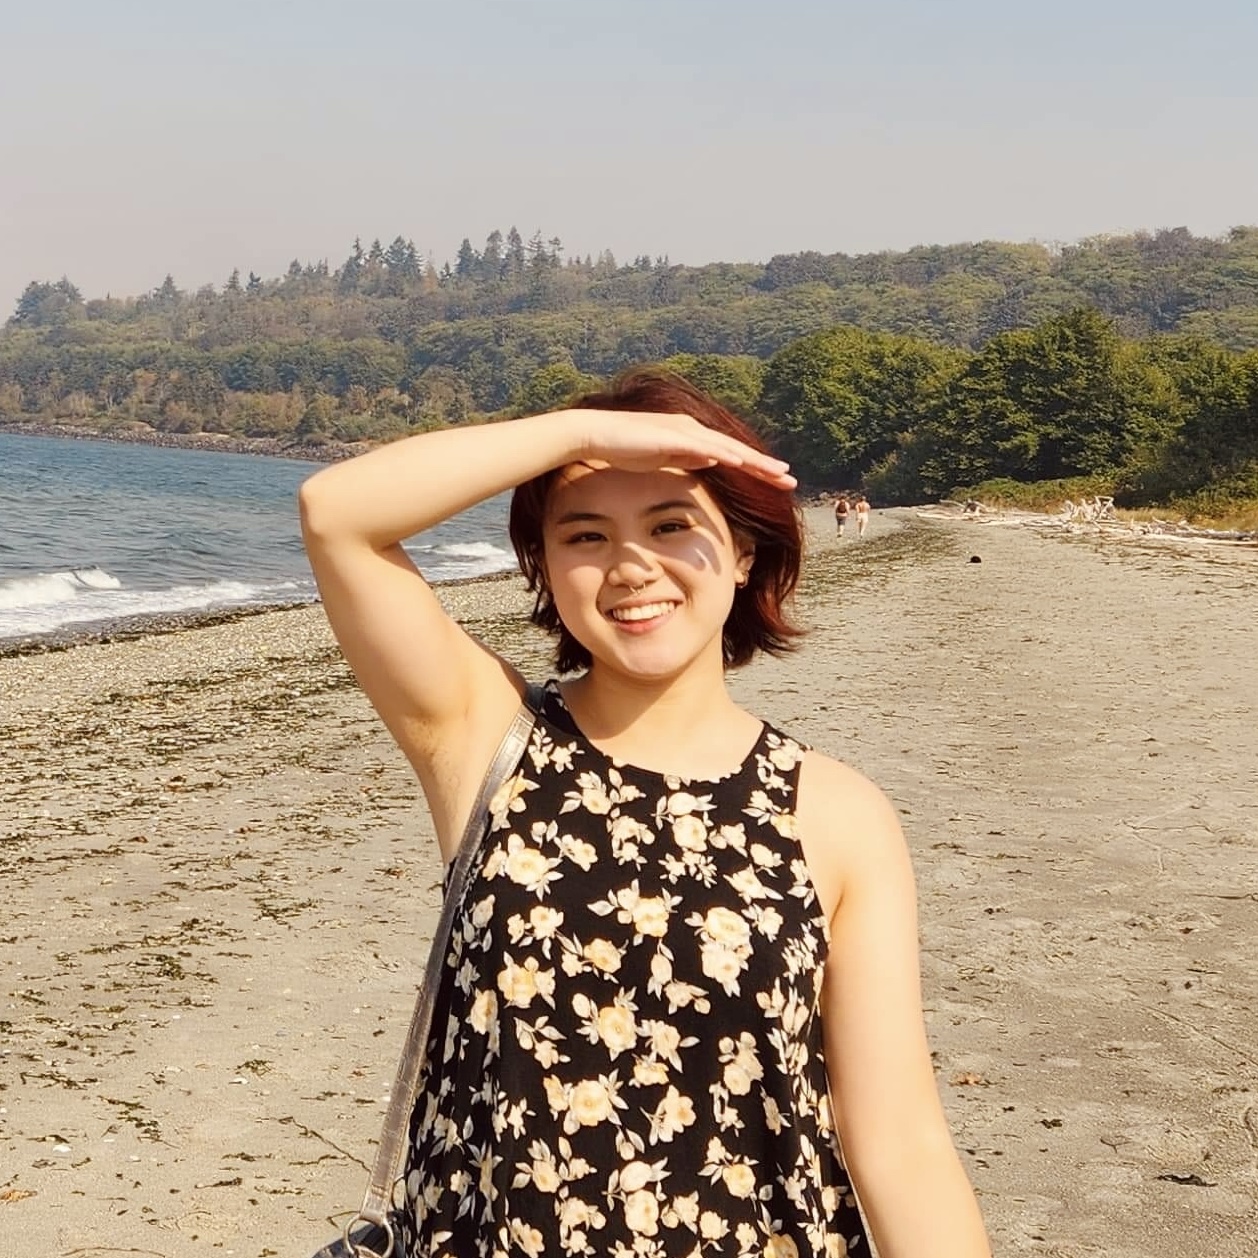 A casual photo of Sam from the waist up. She has short, reddish hair and a big smile. She's blocking the sun from her eyes and wearing a black dress with yellow and white flowers. She's in Discovery Park, right by the sound, and in the distance, there is lush greenery.